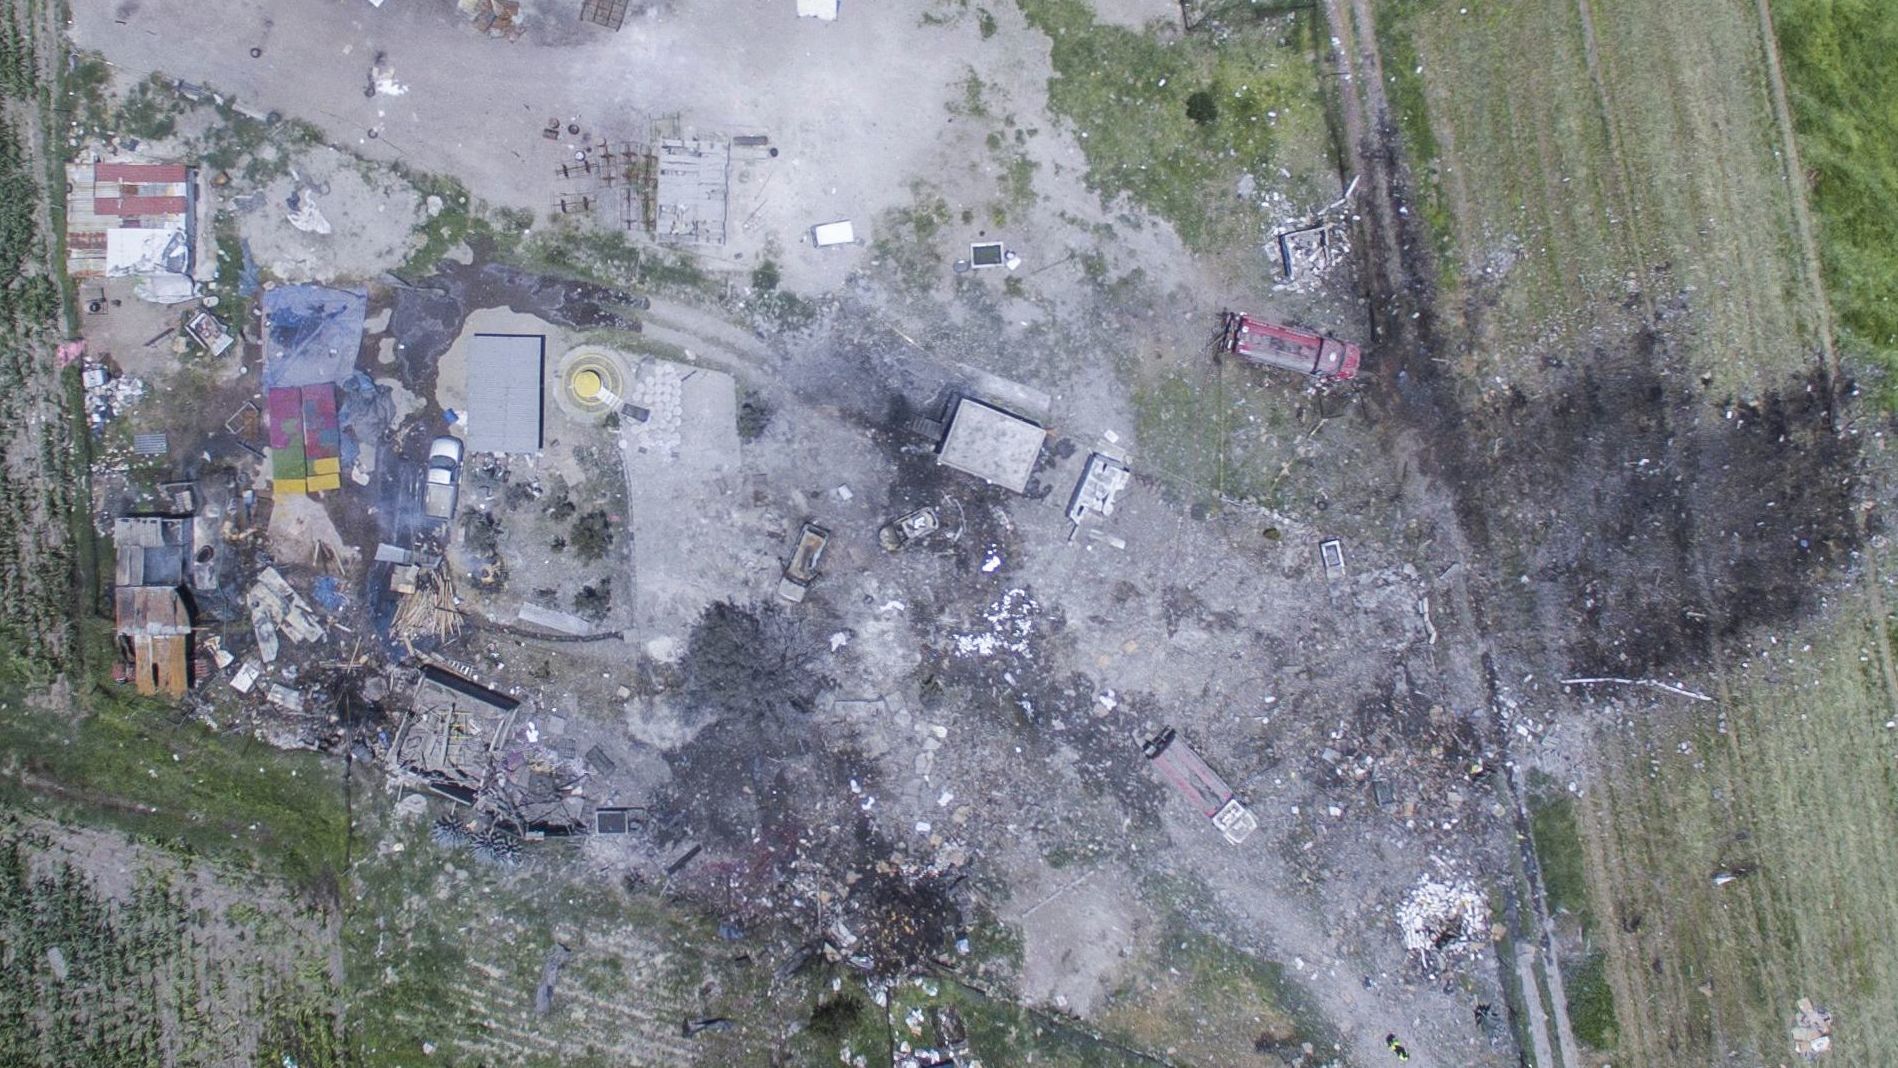 Aerial view shows devastation at warehouses in Tultepec.